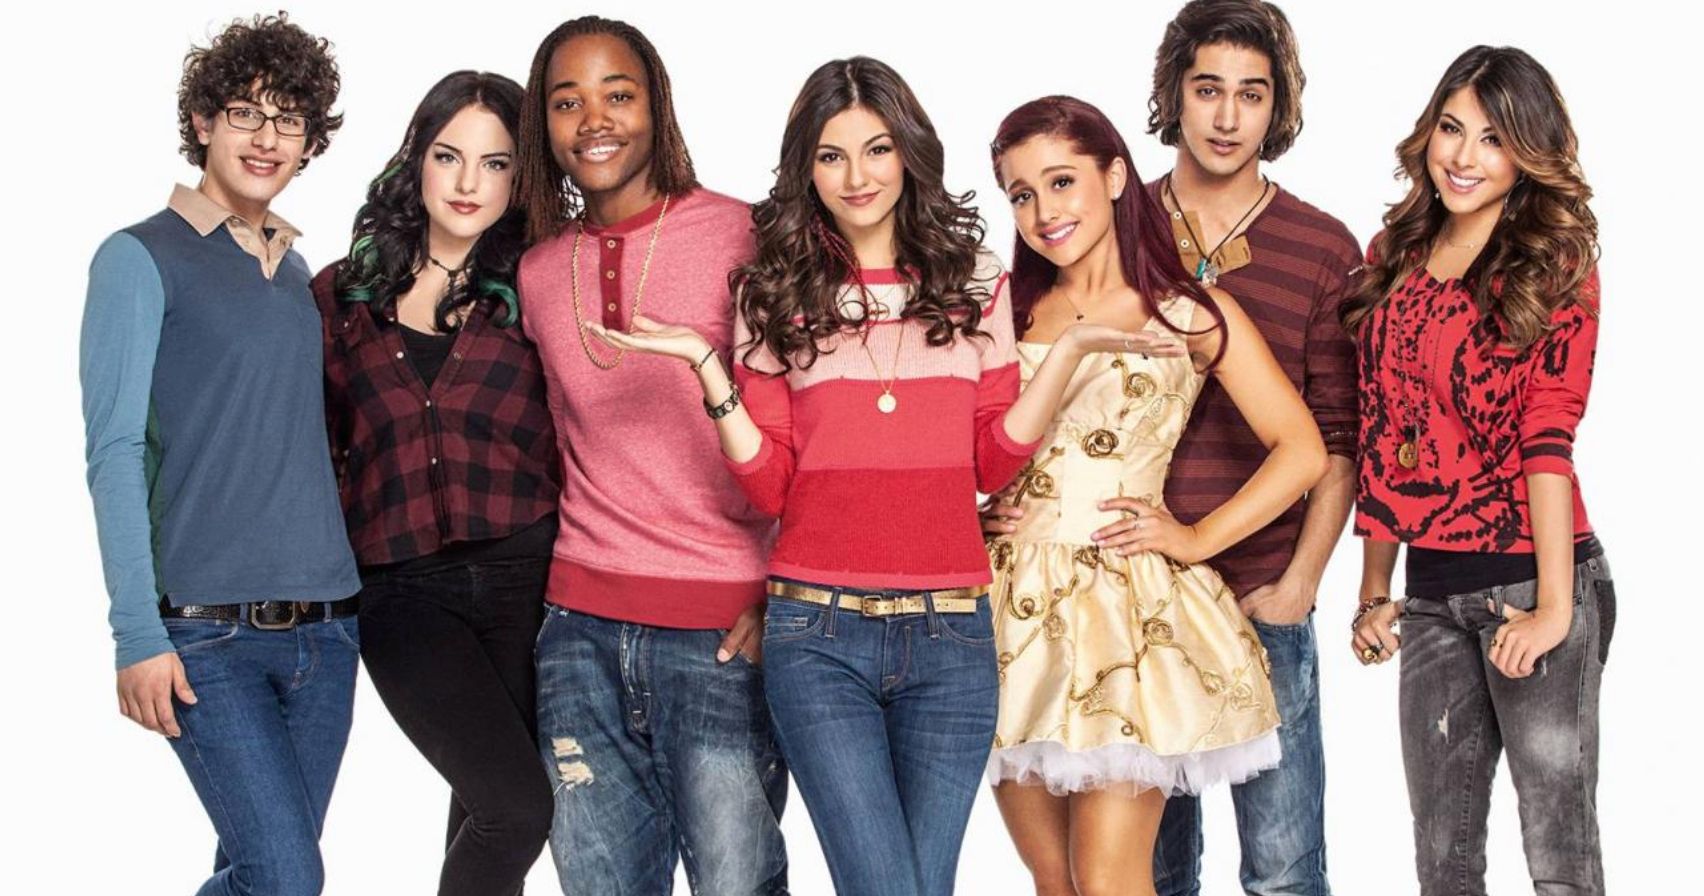 Nickelodeon: Hogwarts Houses Of Victorious Characters